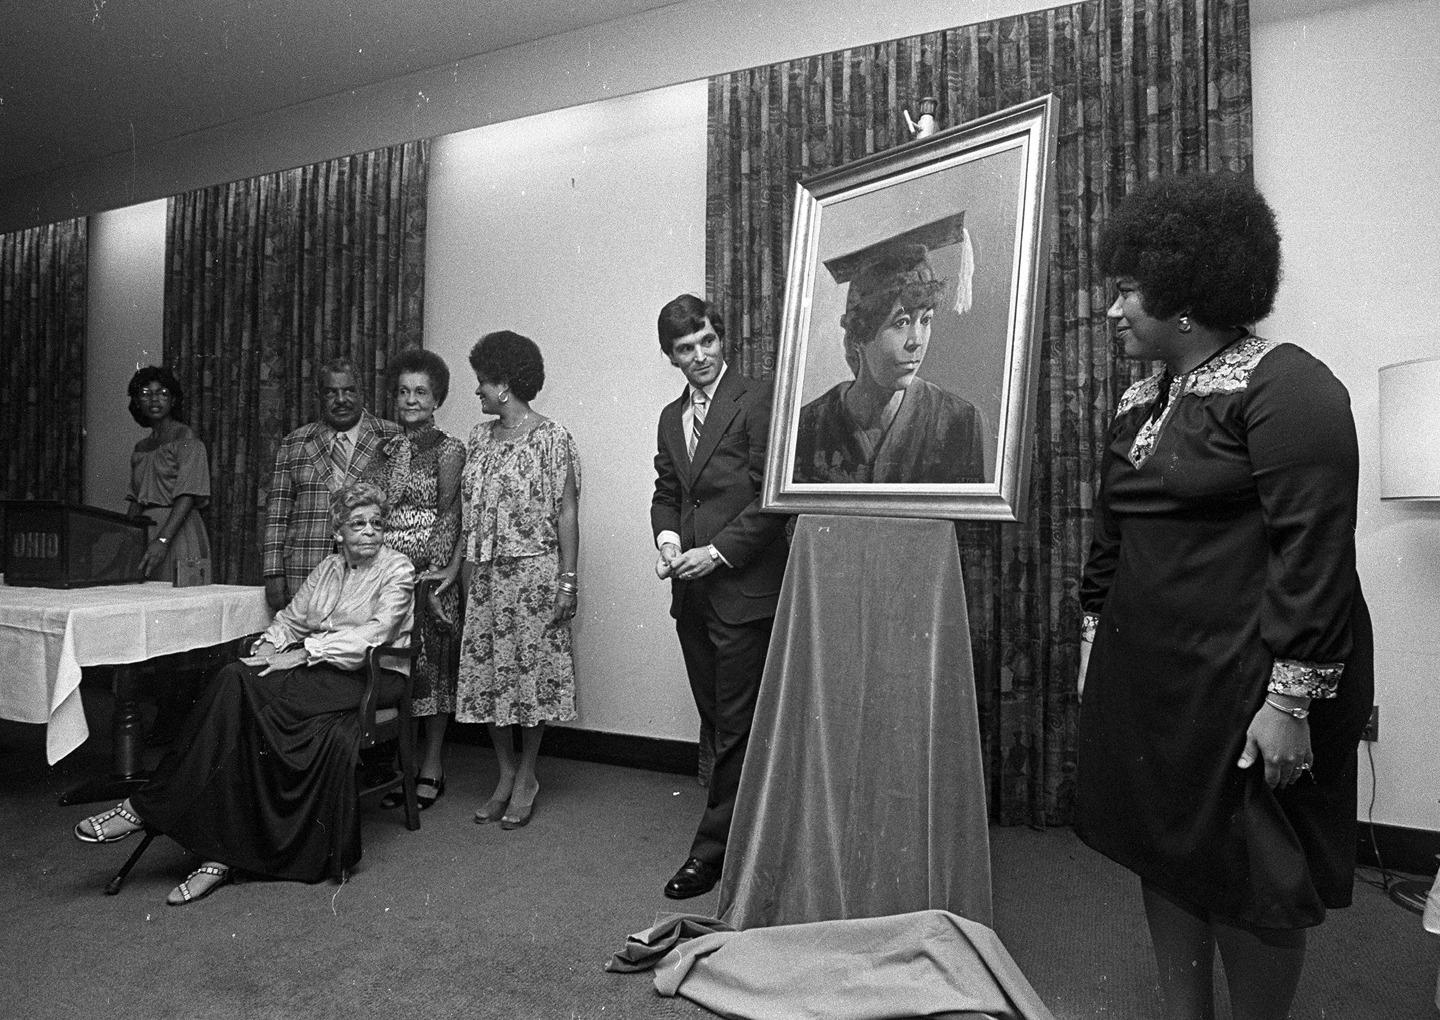 Martha Jane Hunley Blackburn [SEATED] is seen with her 1916 yearbook graduation painting at a 1979 reception held in her honor. In 1999, Alumni Memorial Auditorium was renamed in honor of Blackburn, OHIO’s first Black female graduate, and John Newton Templeton, the University’s first Black male graduate, who earned his Ohio University degree in 1828. The East Portico of the building houses the African American Alumni Heritage Wall. Photo courtesy of the Mahn Center for Archives and Special Collections